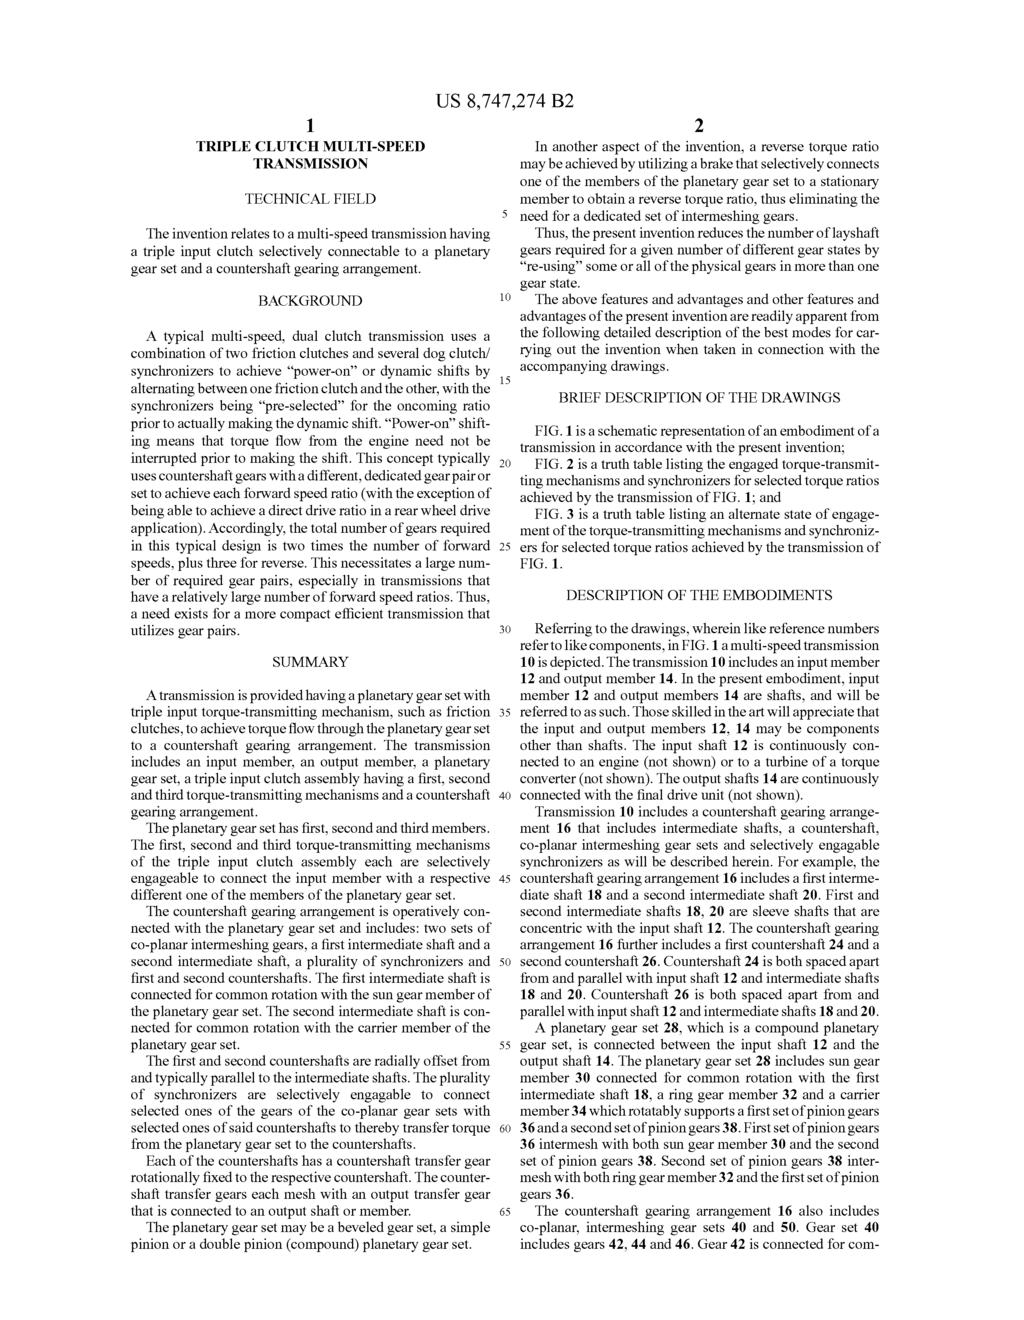 1. TRIPLE CLUTCH MULTI-SPEED TRANSMISSION TECHNICAL FIELD The invention relates to a multi-speed transmission having a triple input clutch selectively connectable to a planetary gear set and a